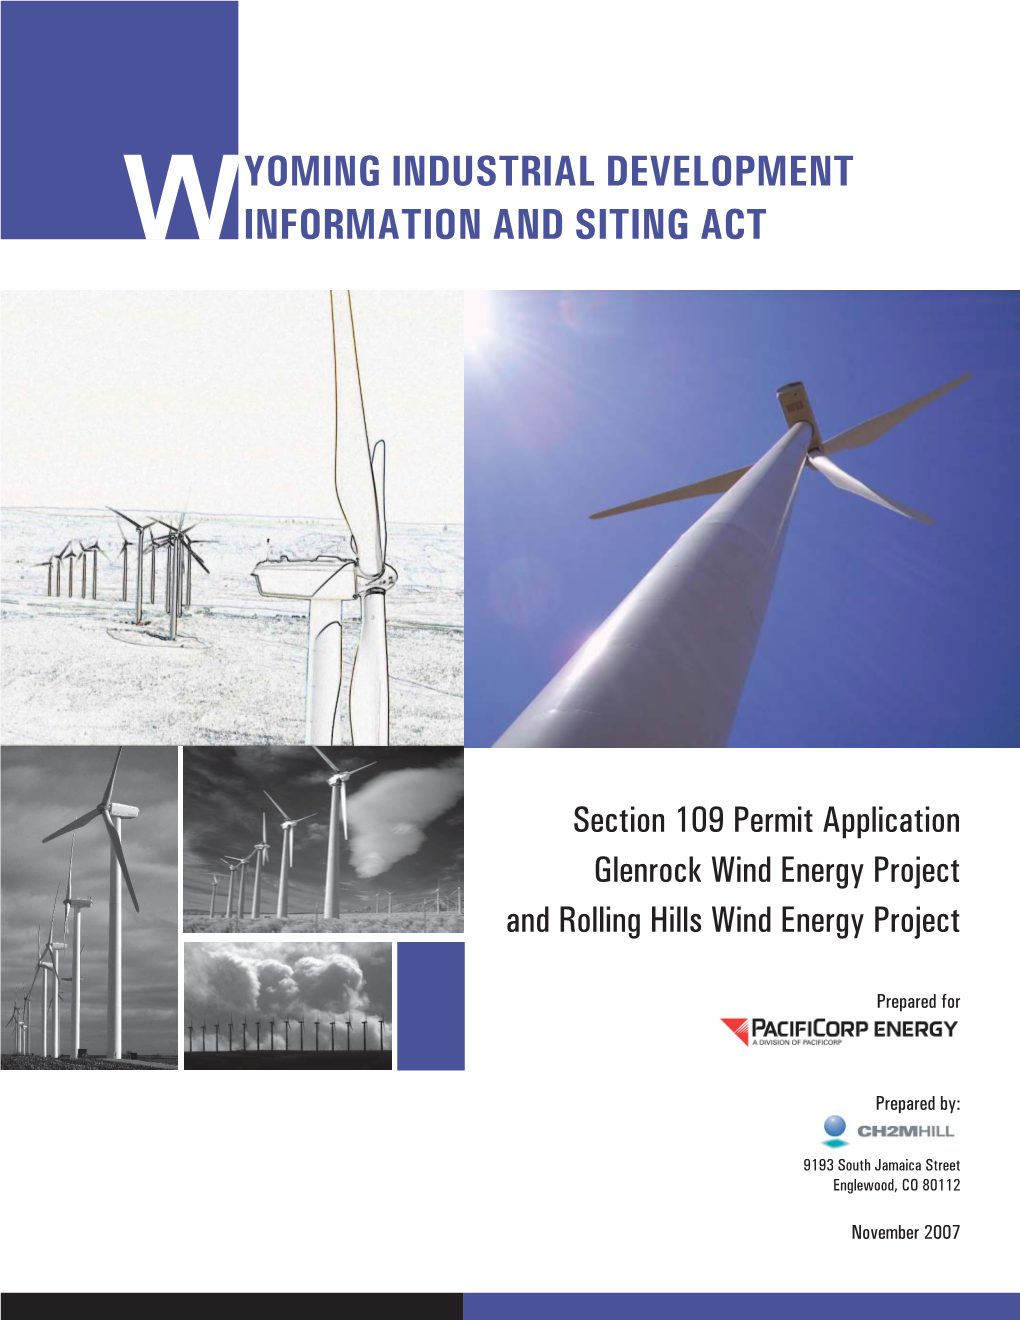 Wyoming Industrial Development Information and Siting Act